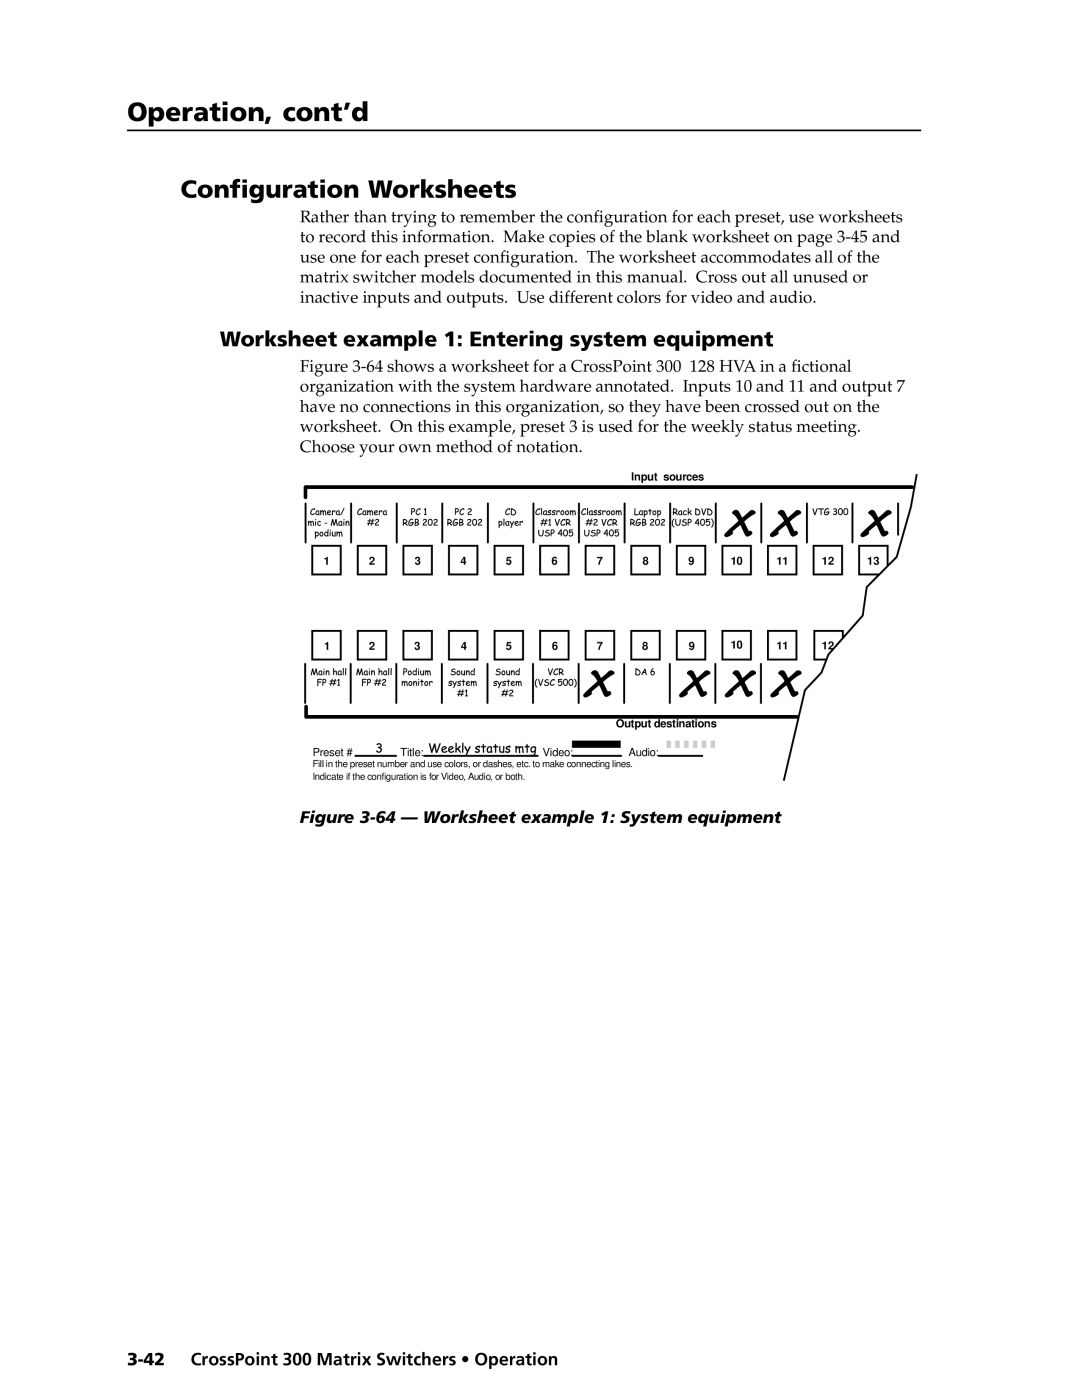 Extron electronic 1212, 84, 1616 Configuration Worksheets, Worksheet example 1 Entering system equipment, Operation, cont’d 